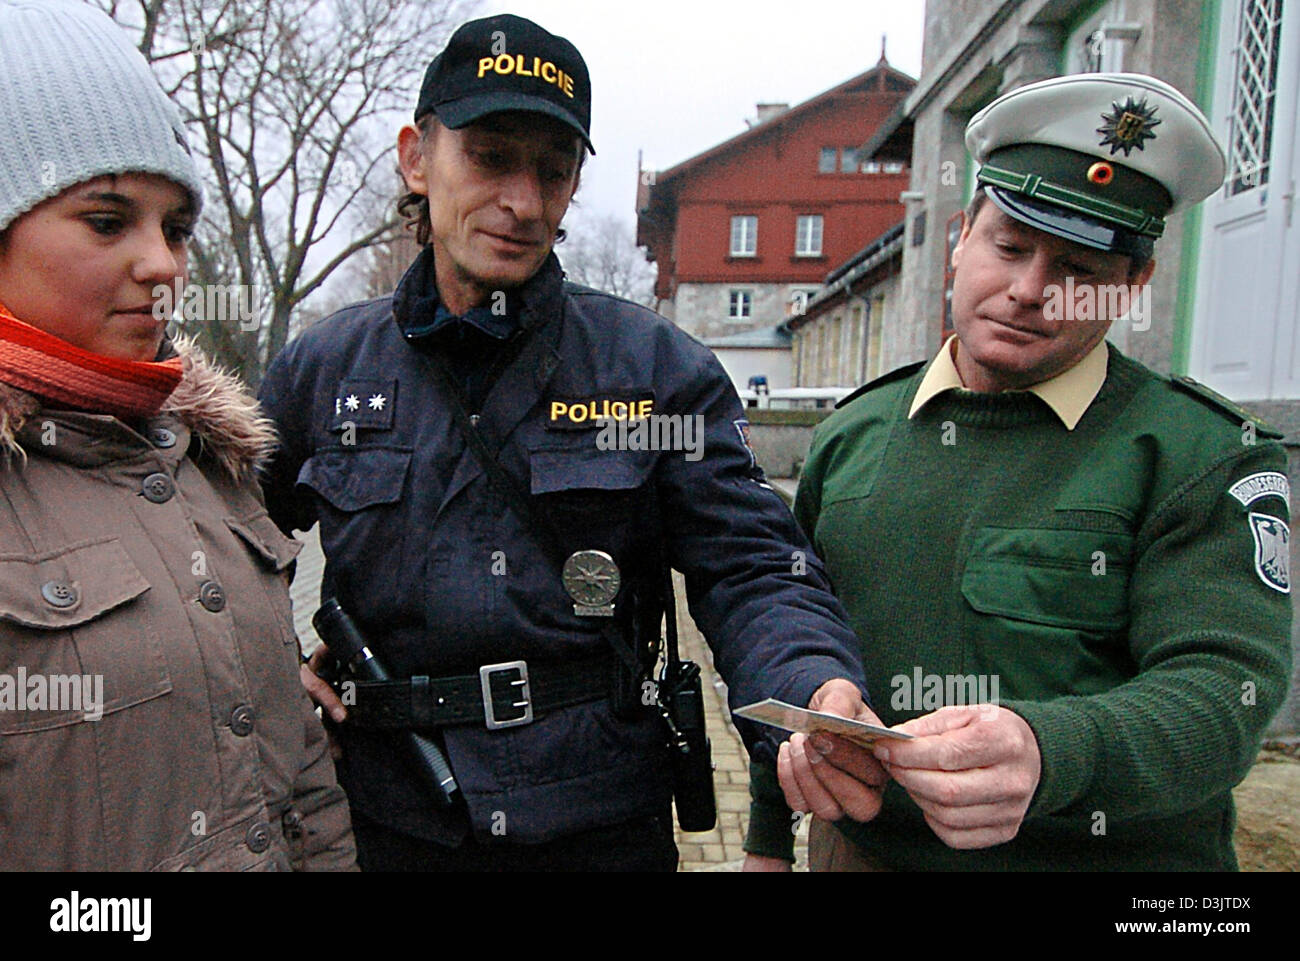 (dpa) - A Czech border guard (C) and his German colleague (R) inspect the identity card of a young woman at the Czech-German border corssing in Eisenstein, Germany, 6 December 2004. The trafficing of people currently proves to be profitable as ever. German Federal Border Guards (BGS) continue to track down refugees who attempt to cross the border into Germany illegally, despite the Stock Photo